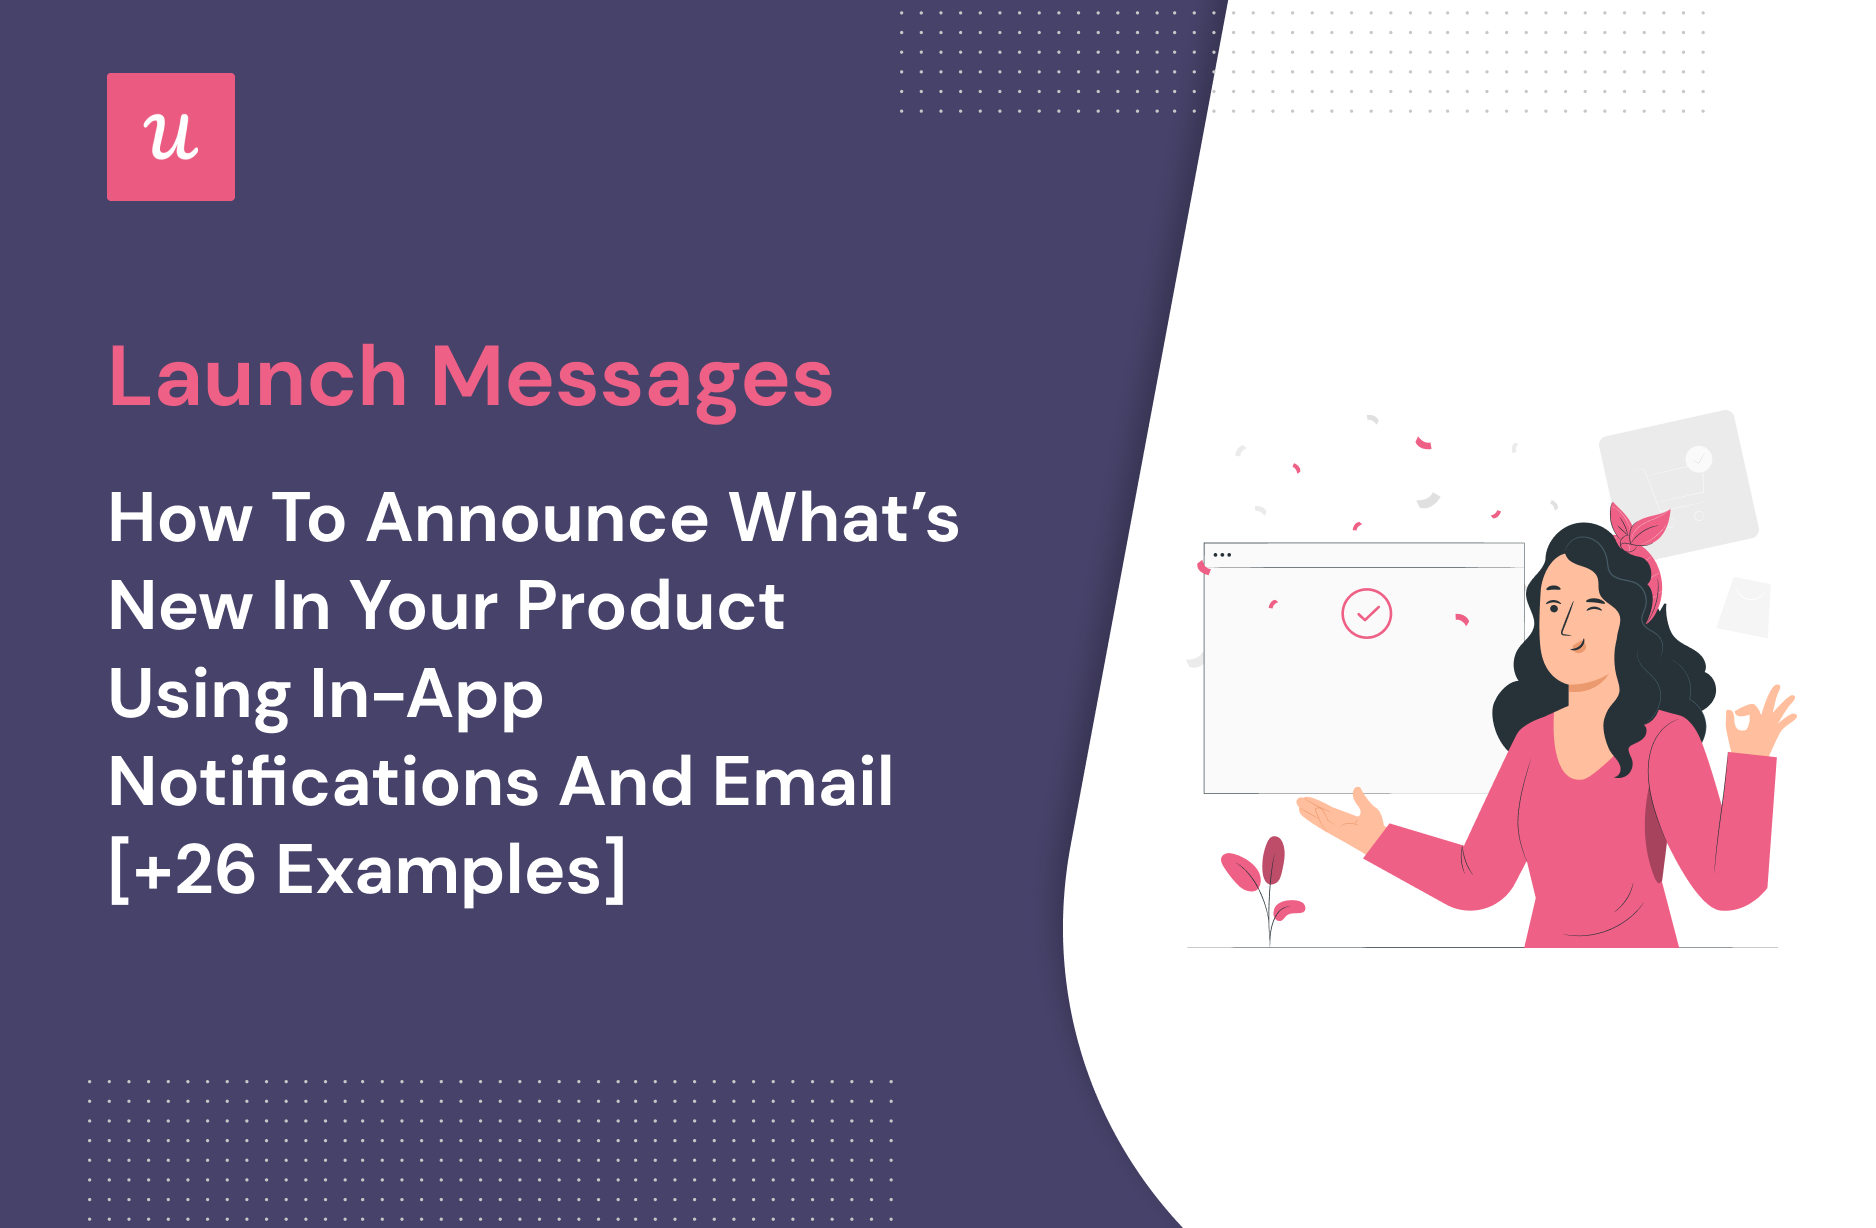 Launch Messages_ How To Announce What’s New In Your Product Using In-app Notifications And Email [+26 Examples]